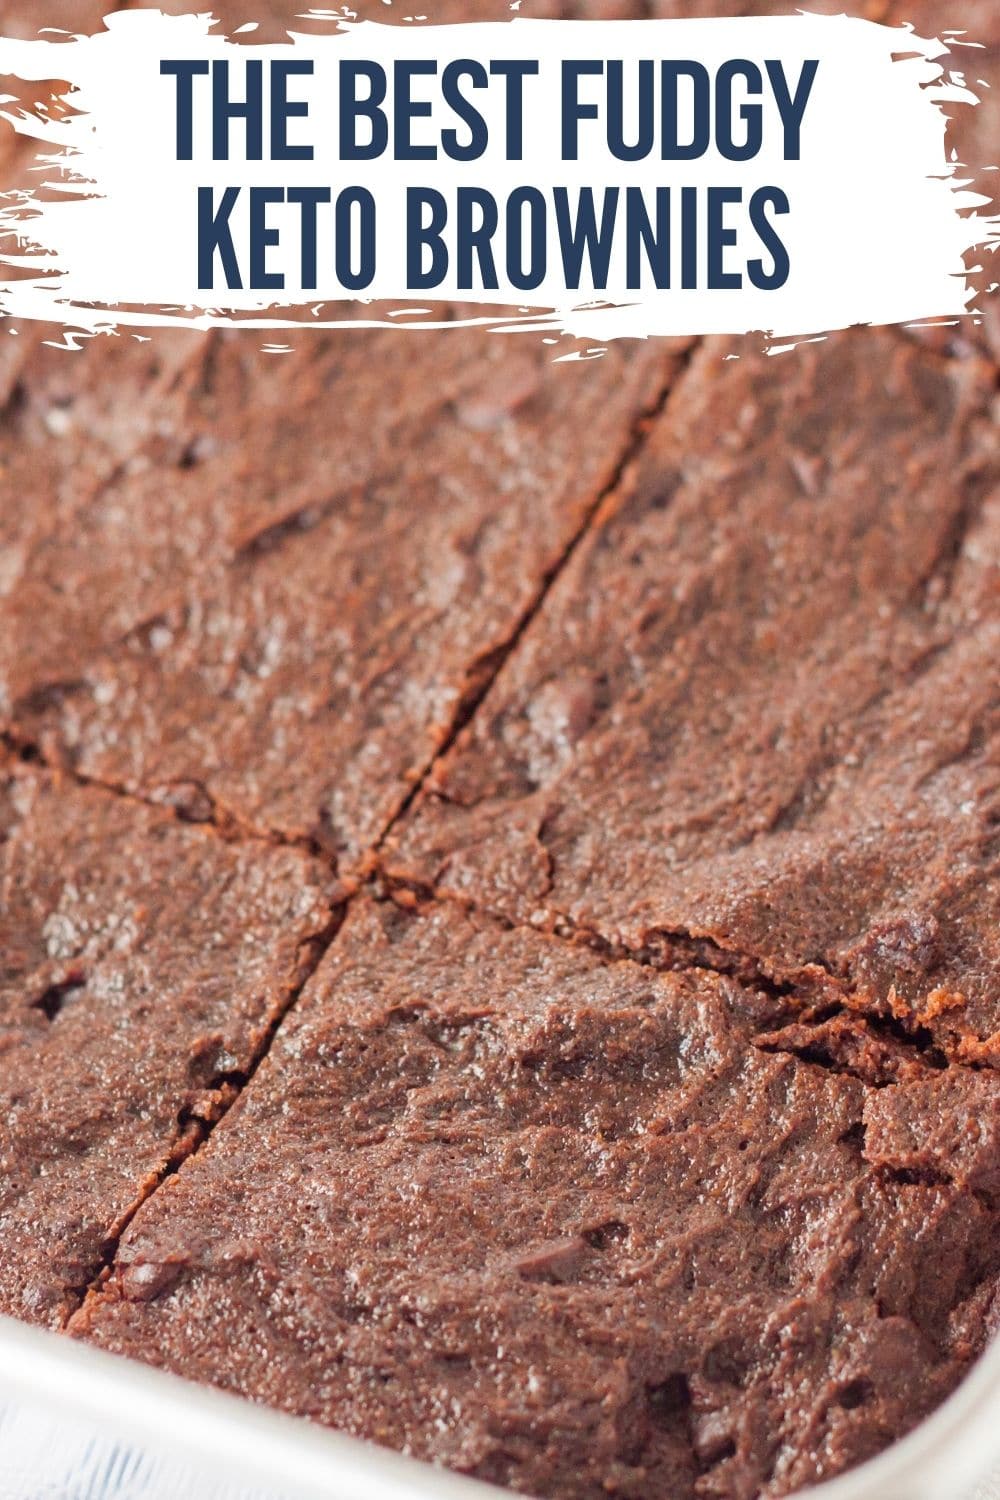 keto brownie in a baking dish